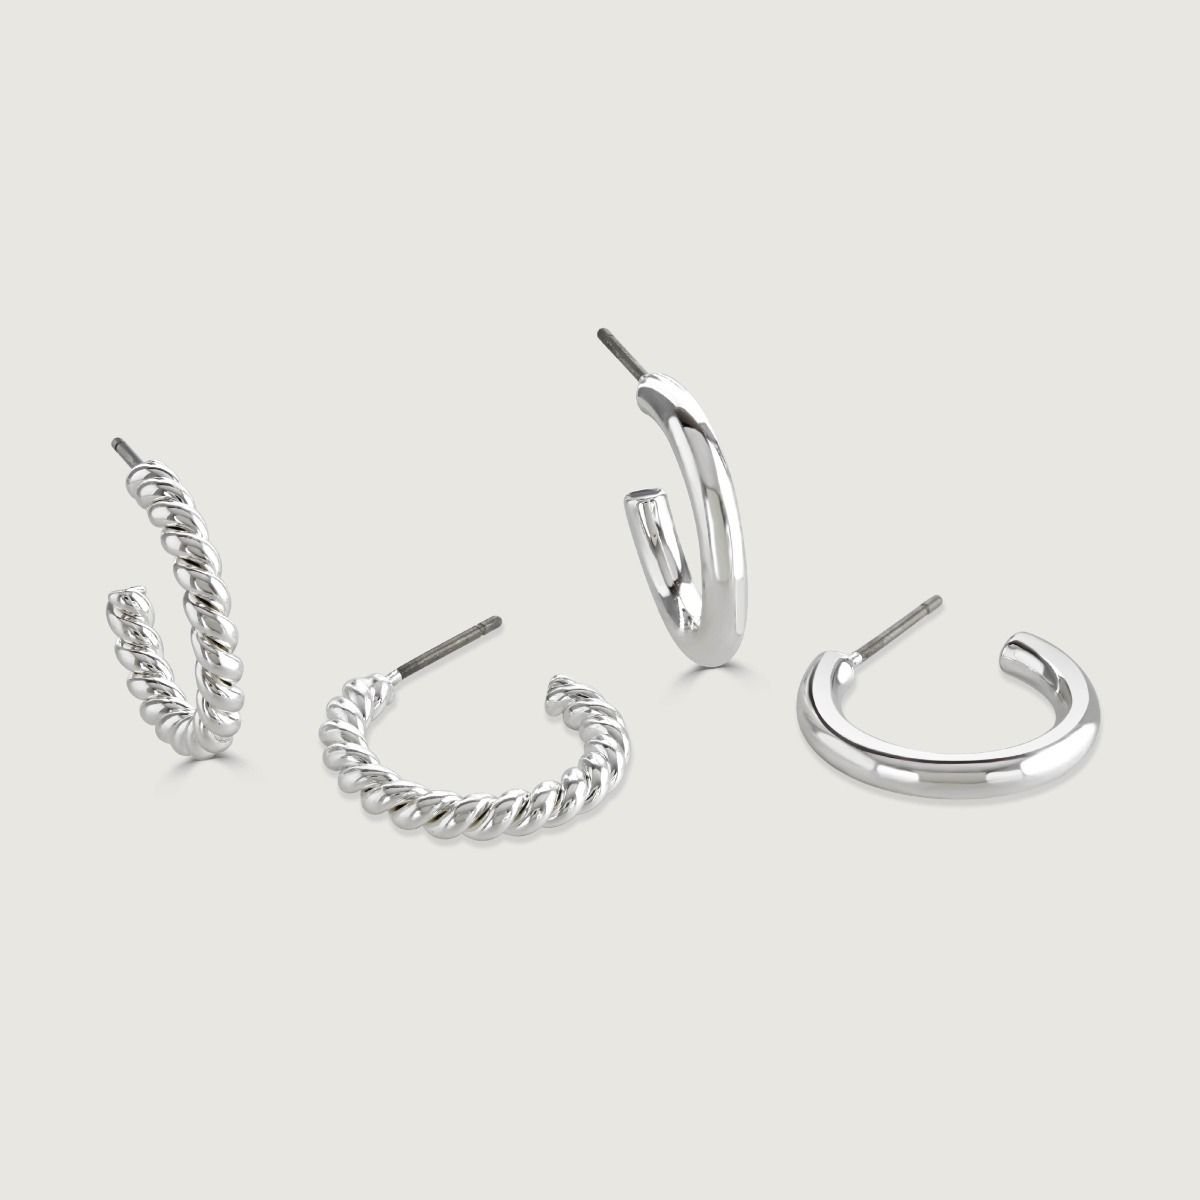 Freya Silver Hoop Duo  The Freya Earring Duo features two pairs of contrasting hoops in silver plate; one sleek, smooth and polished and the other a twisted, braid design.  